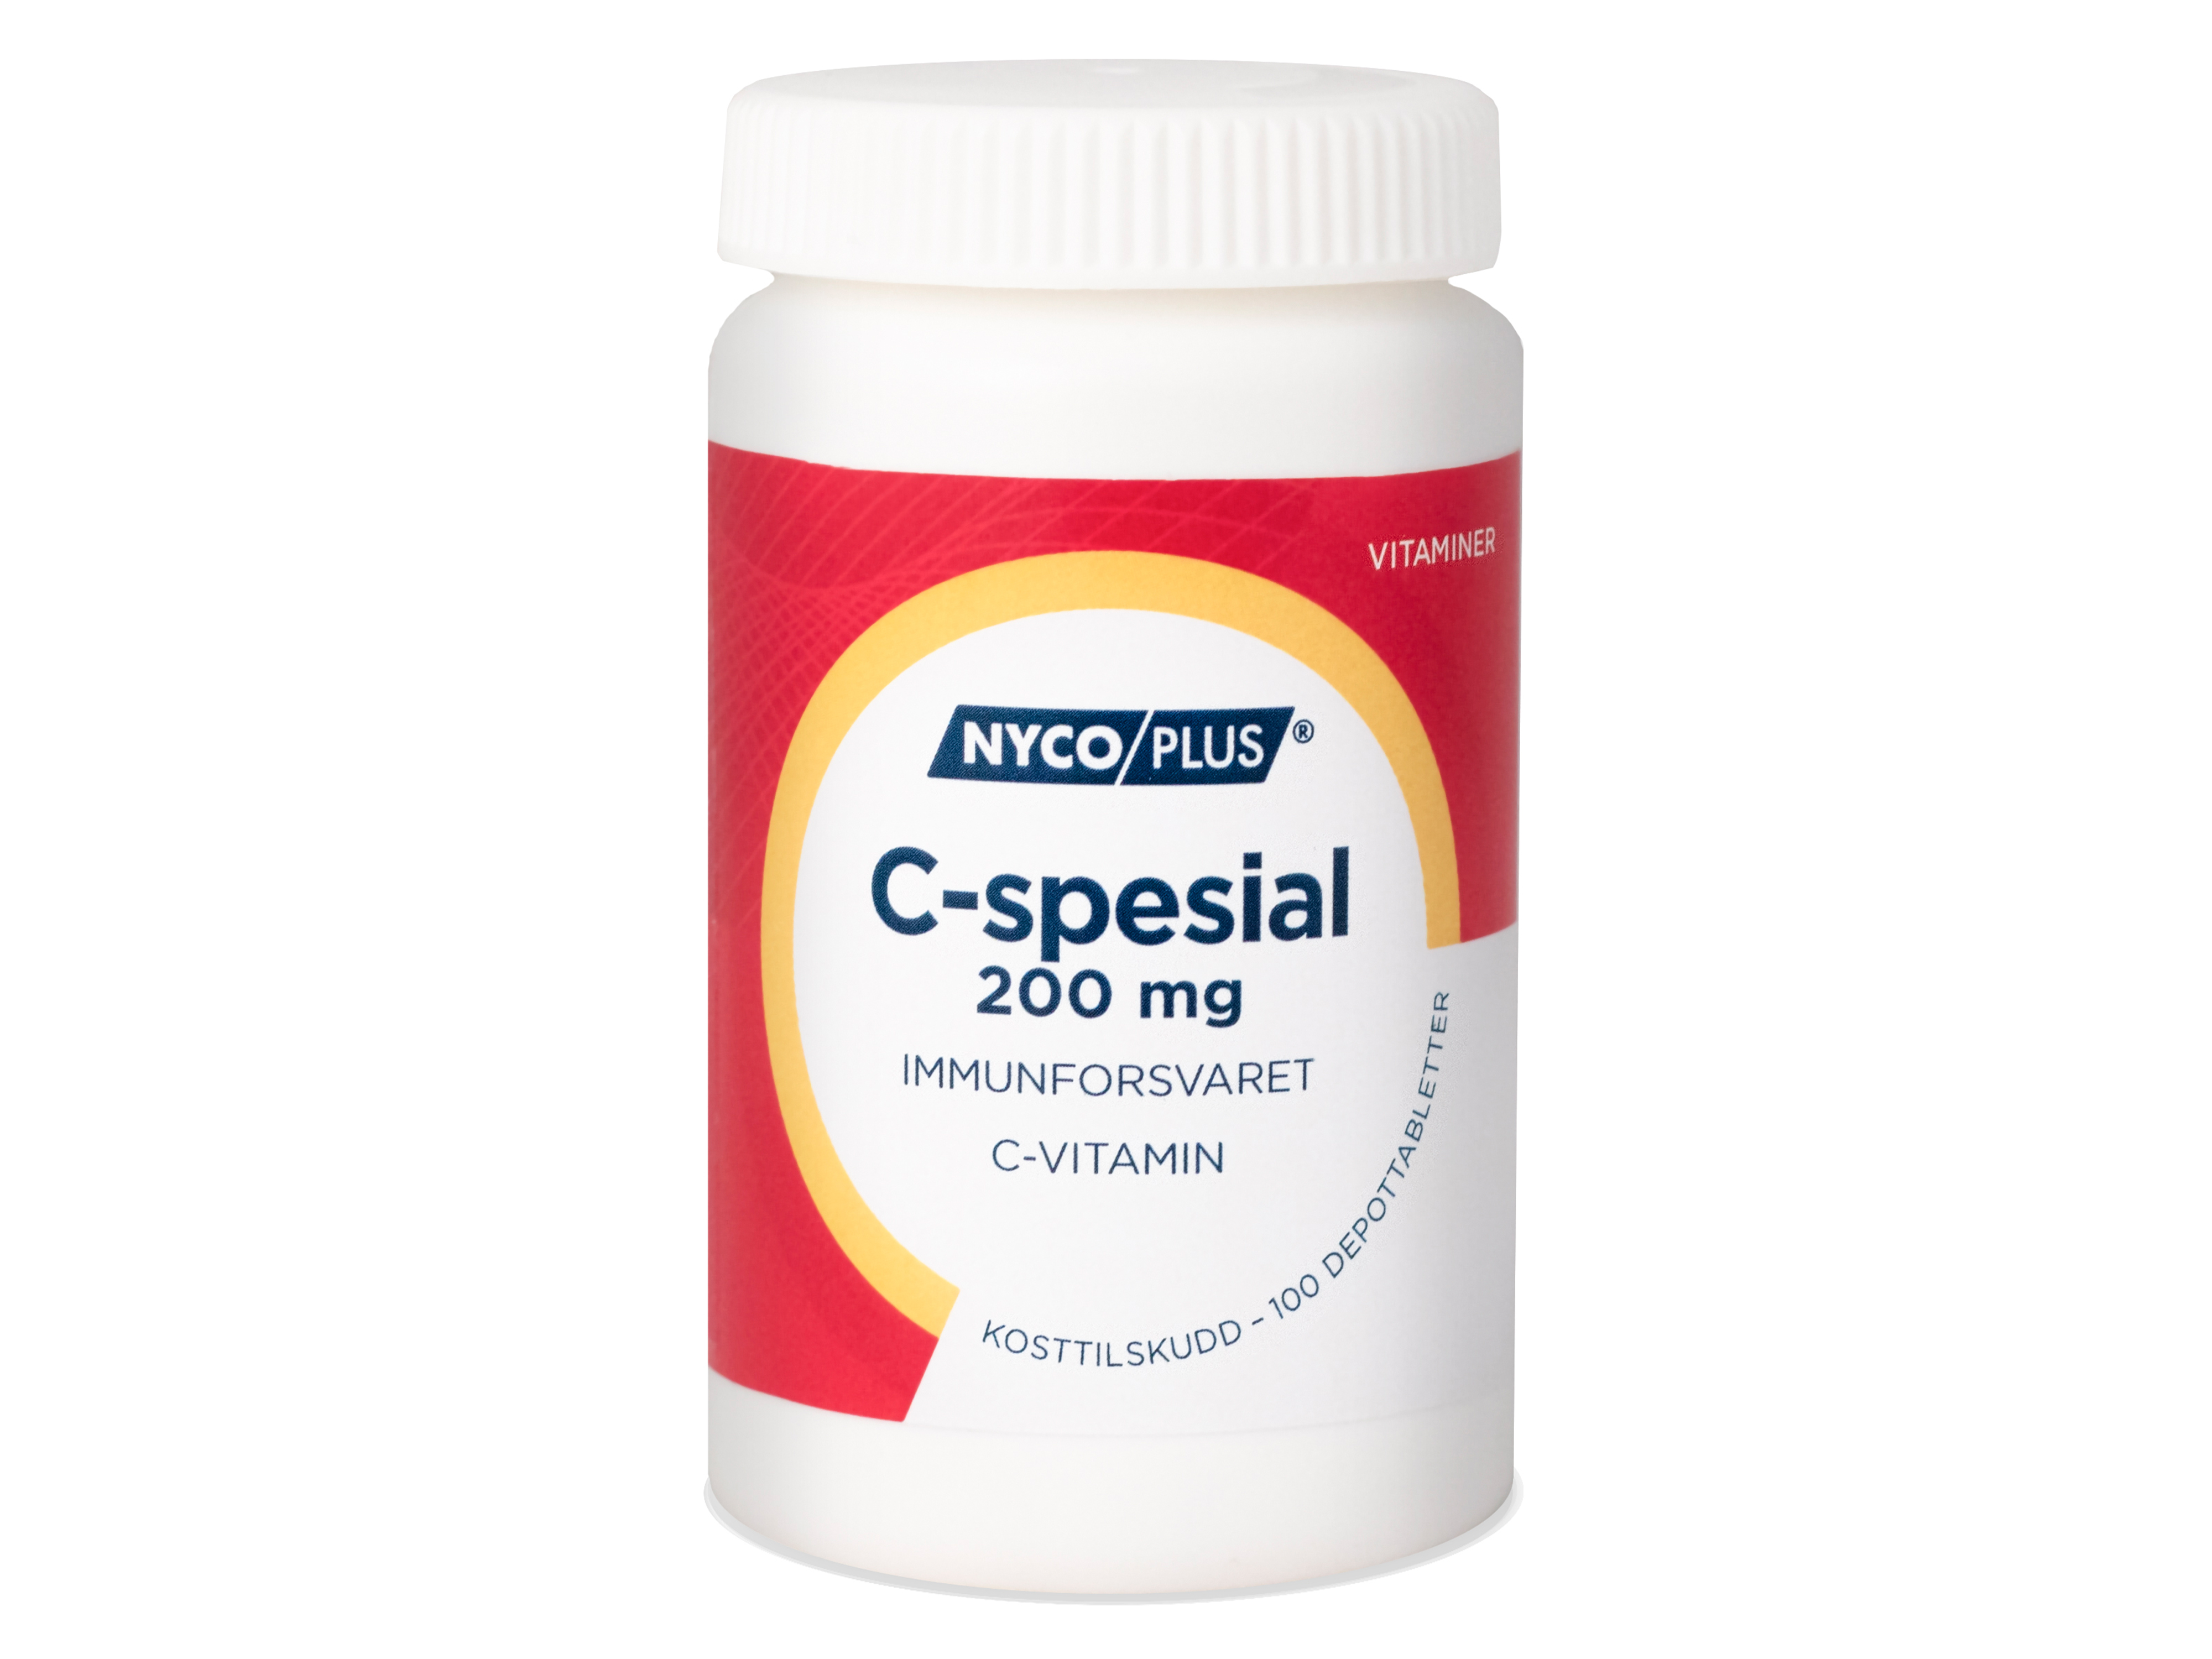 Nycoplus C-spesial 200 mg, 100 depottabletter